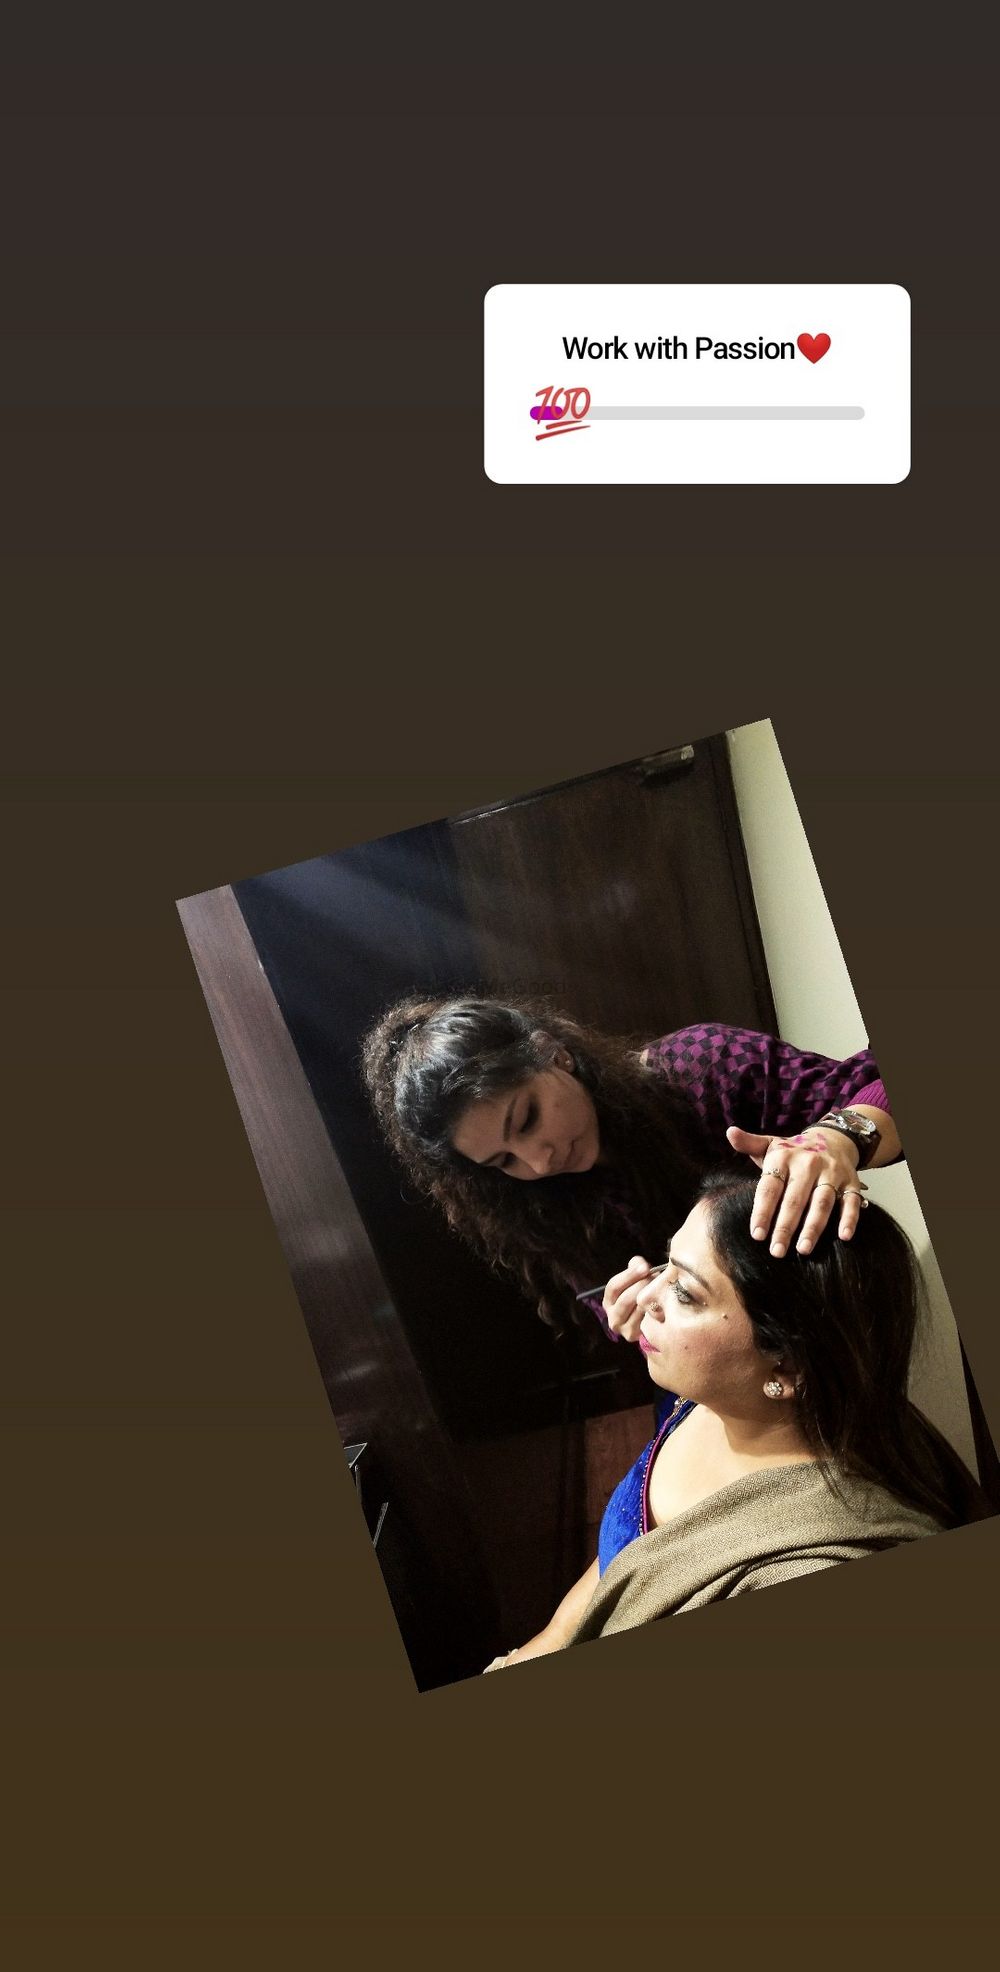 Photo From Behind The Shoots❤ - By Tanya Malhotra Makeovers